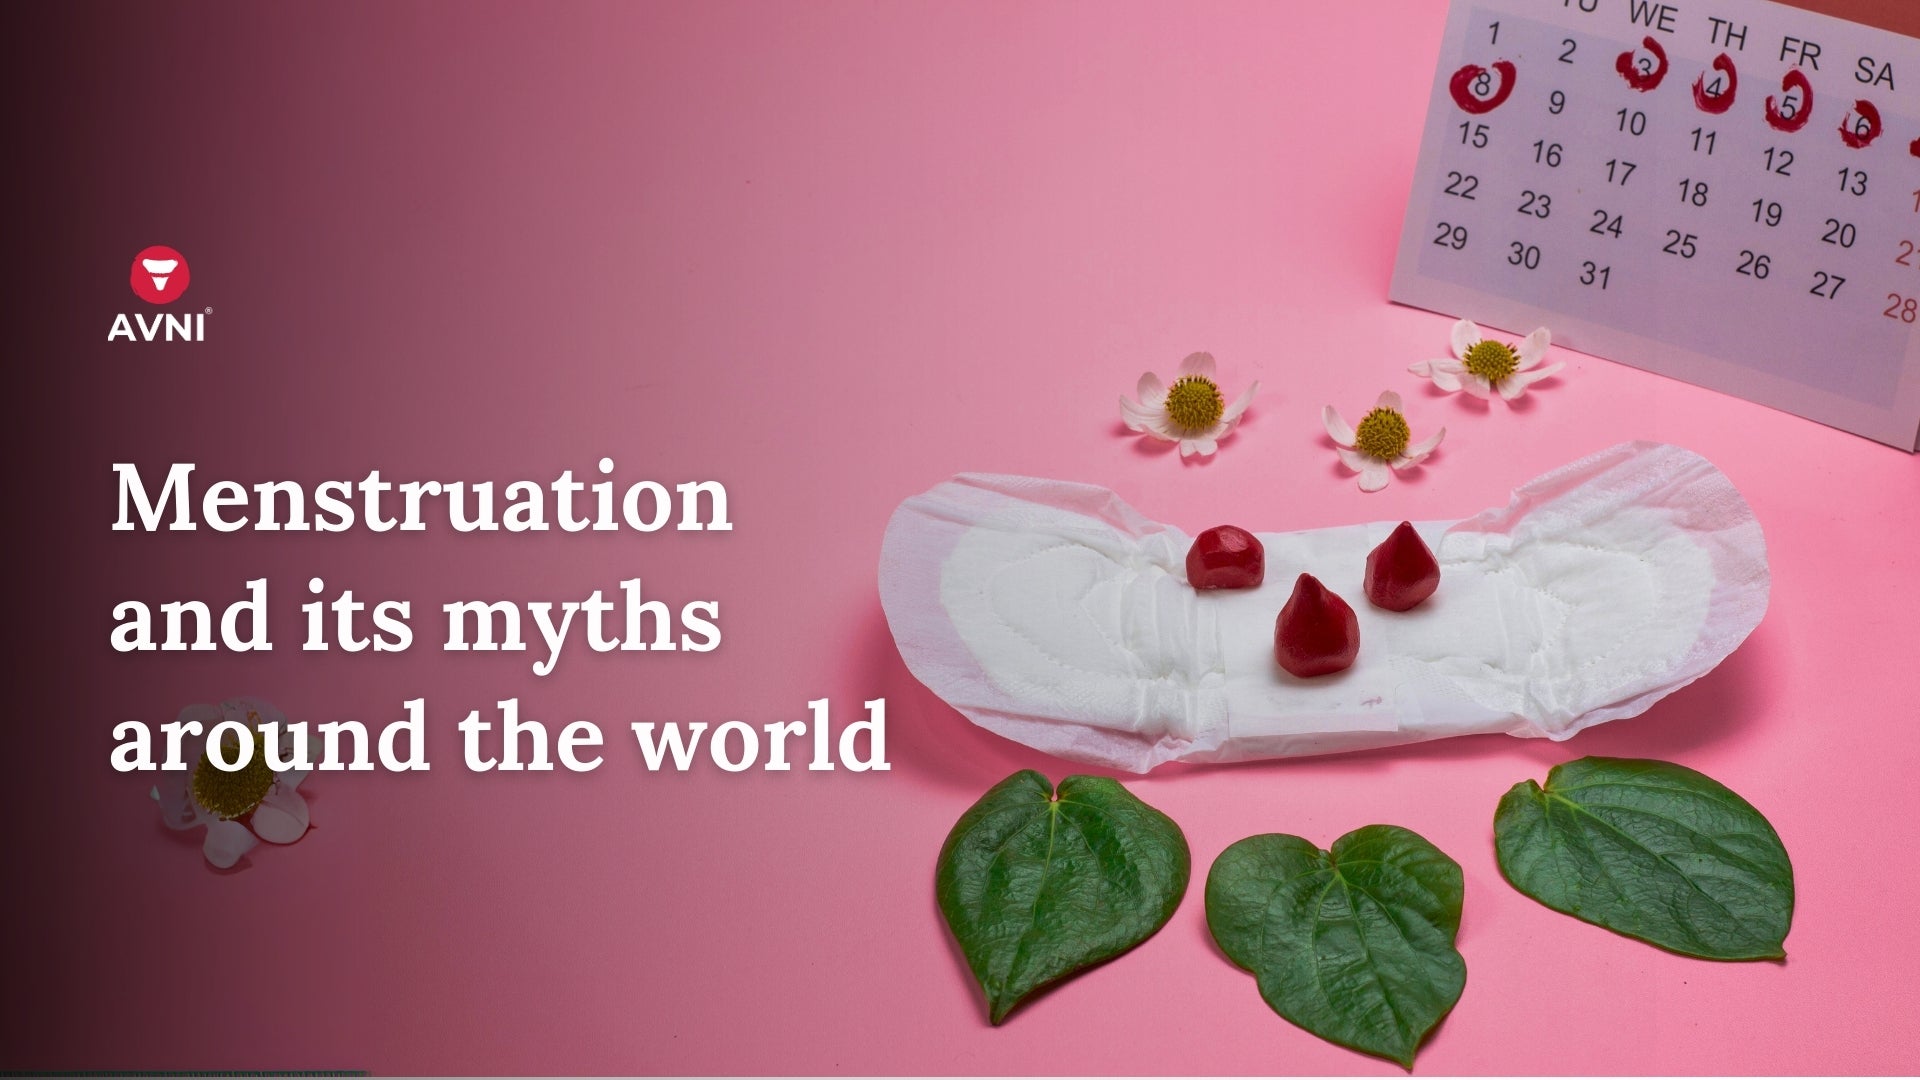 Menstruation and its myths around the world